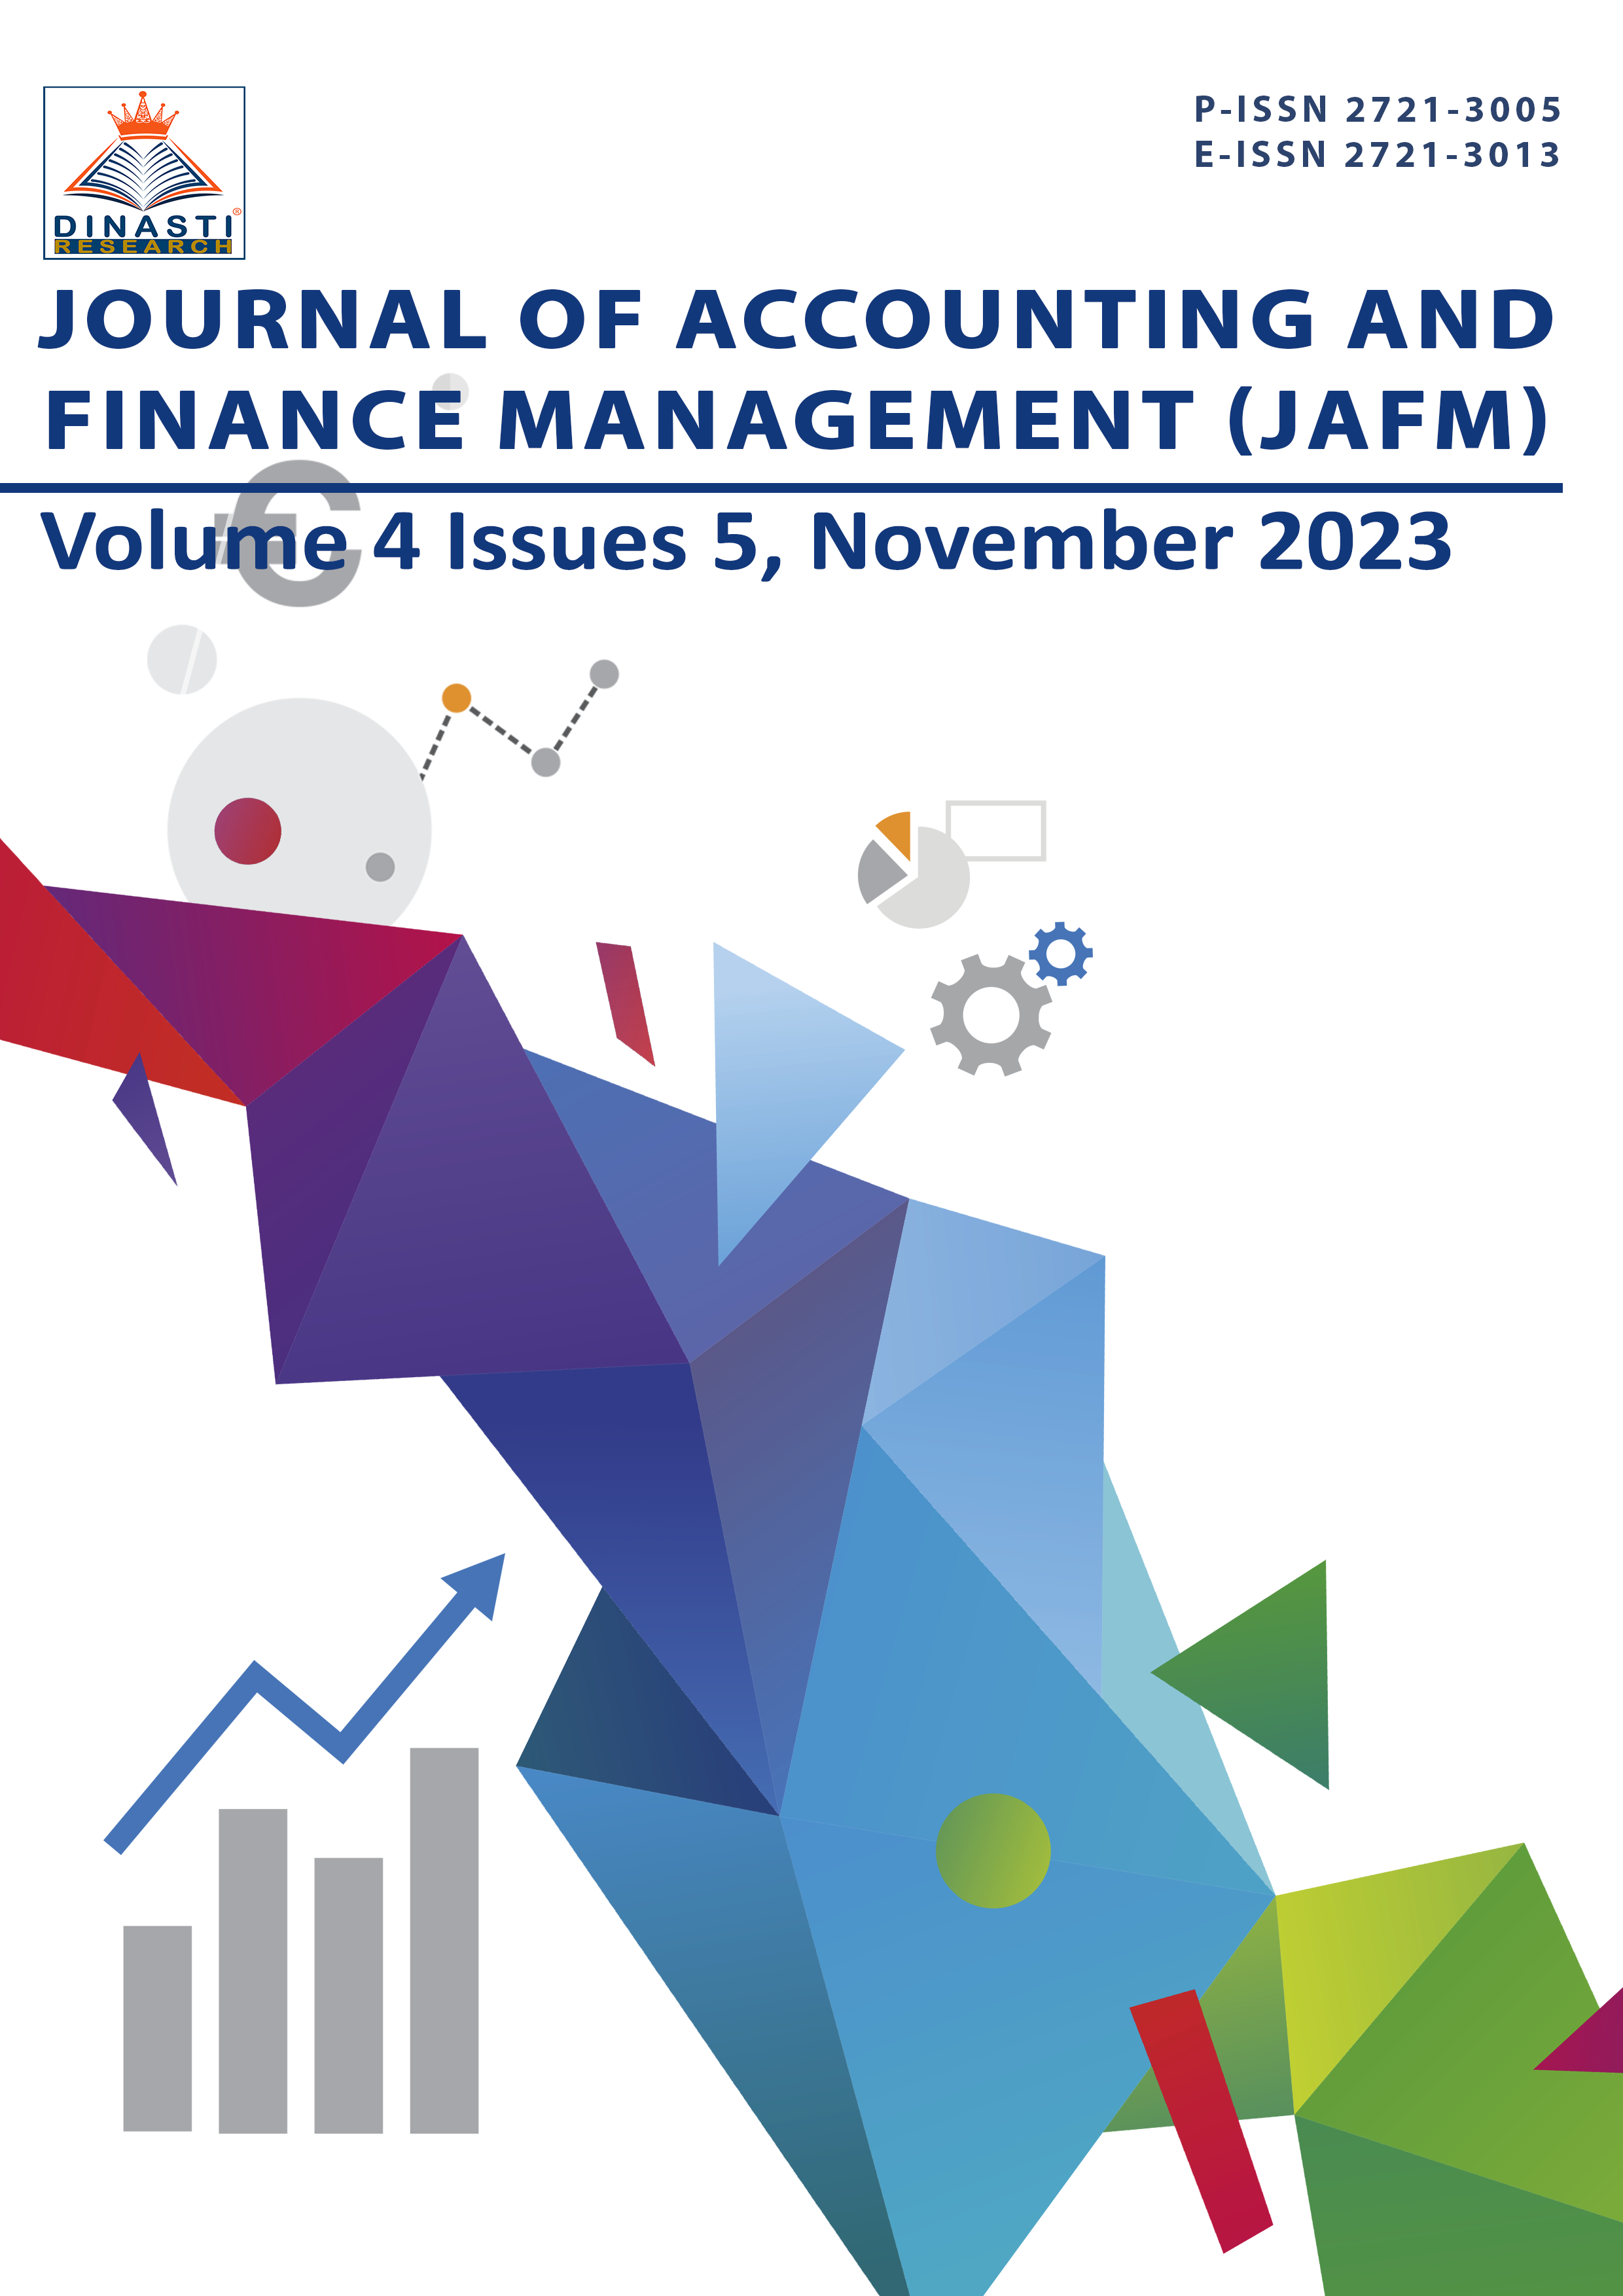 					View Vol. 4 No. 5 (2023): Journal of Accounting and Finance Management (November-December 2023)
				